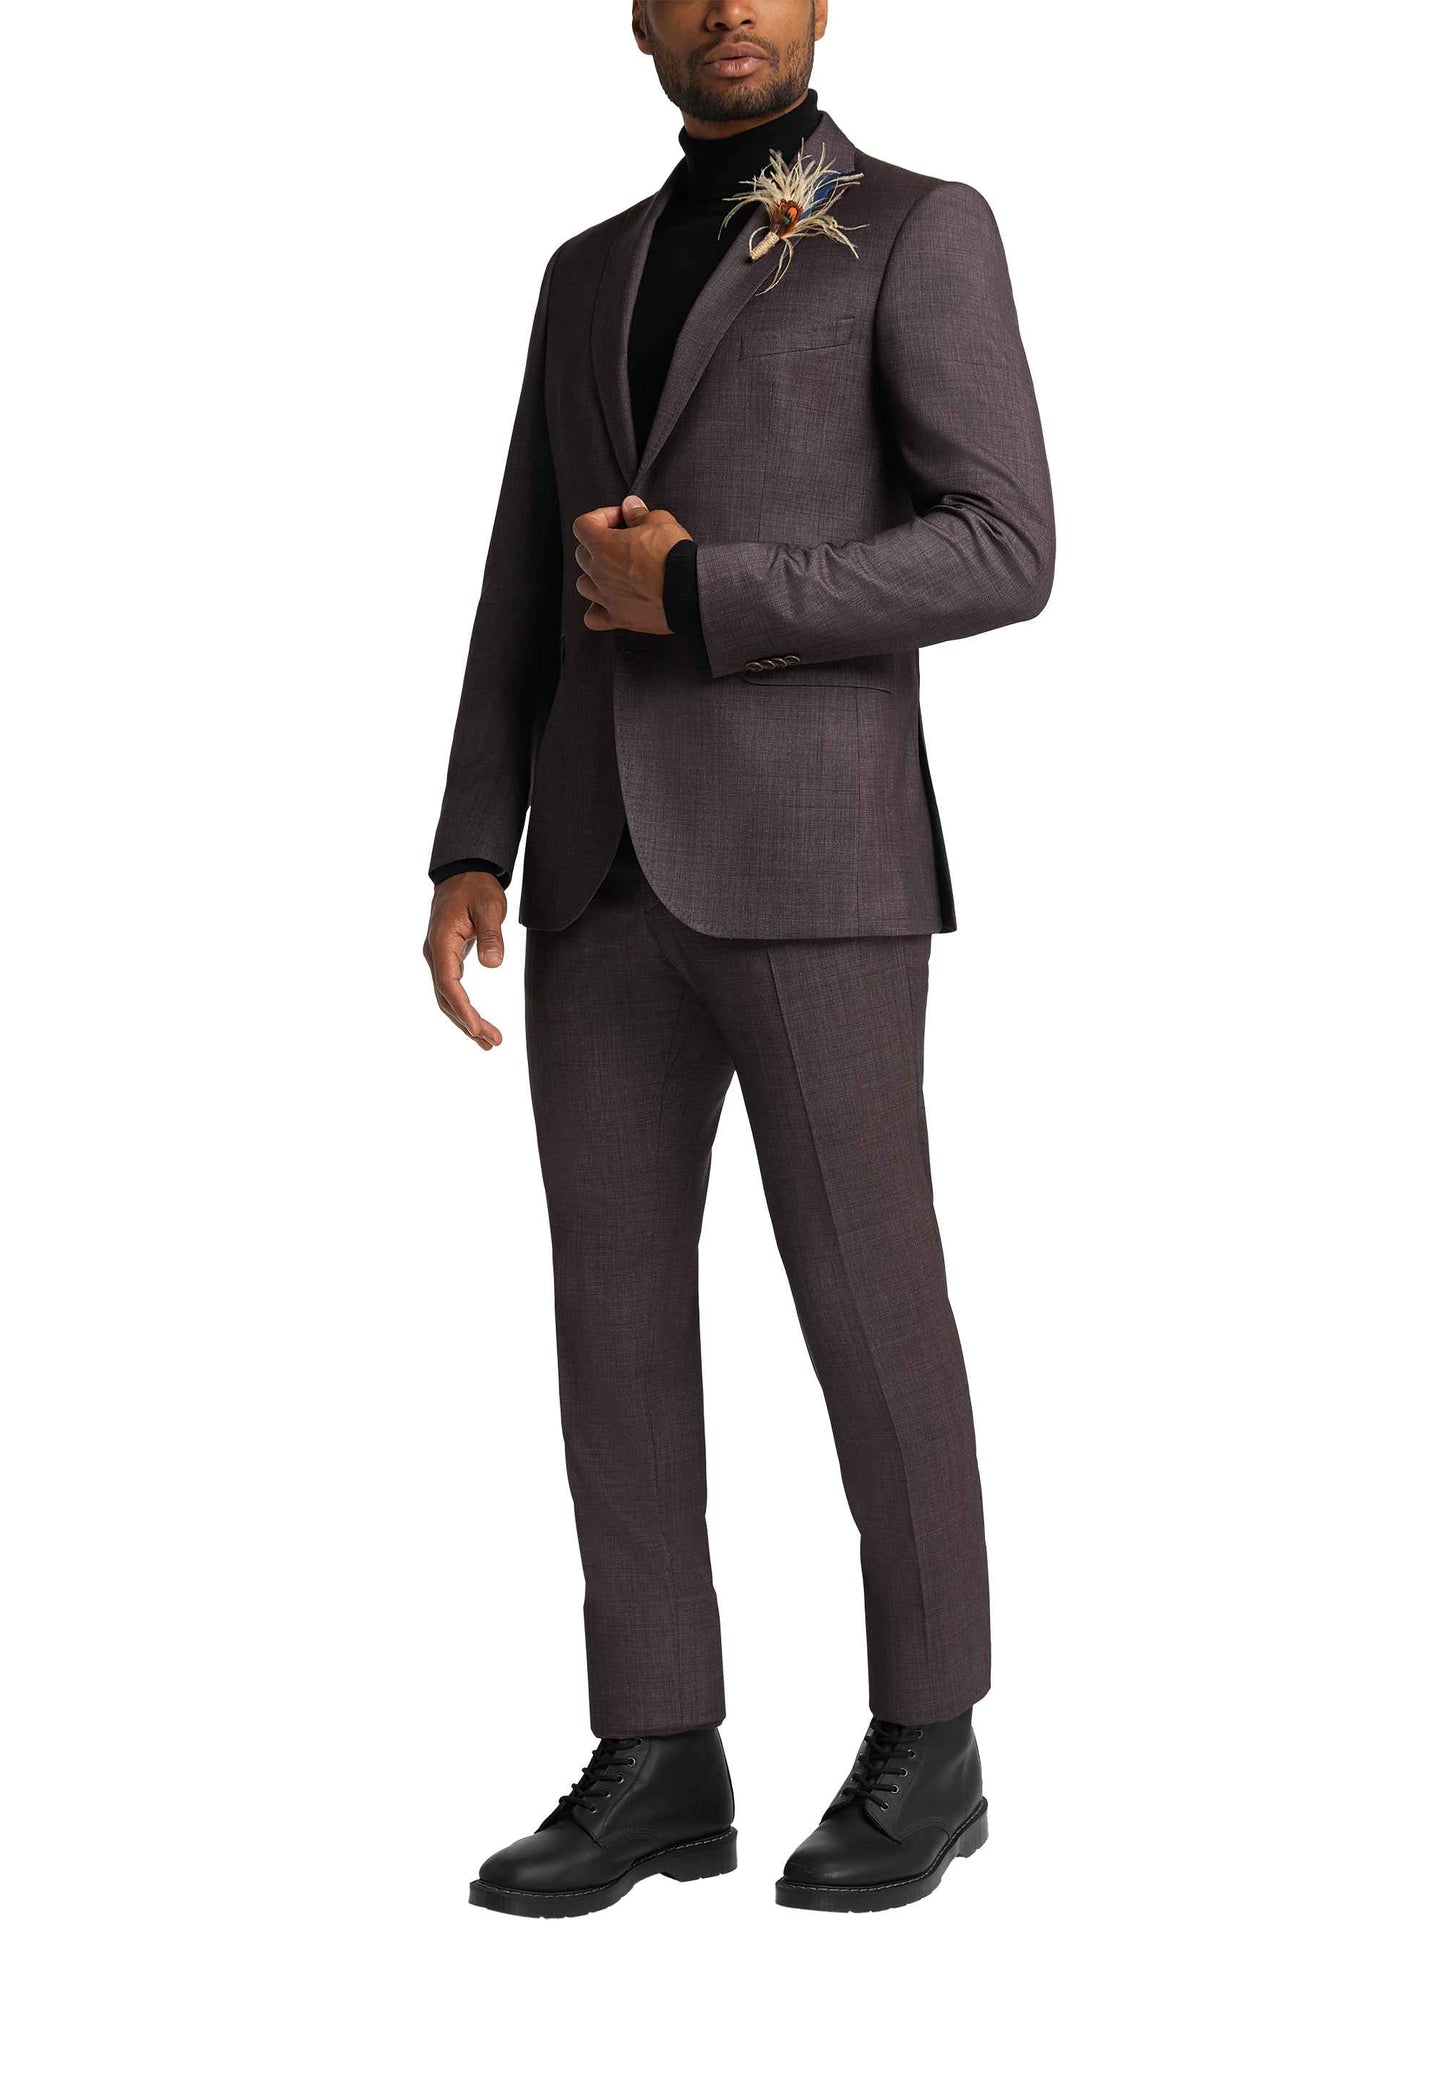 Your Own Party Club of Gents Two Piece Suit